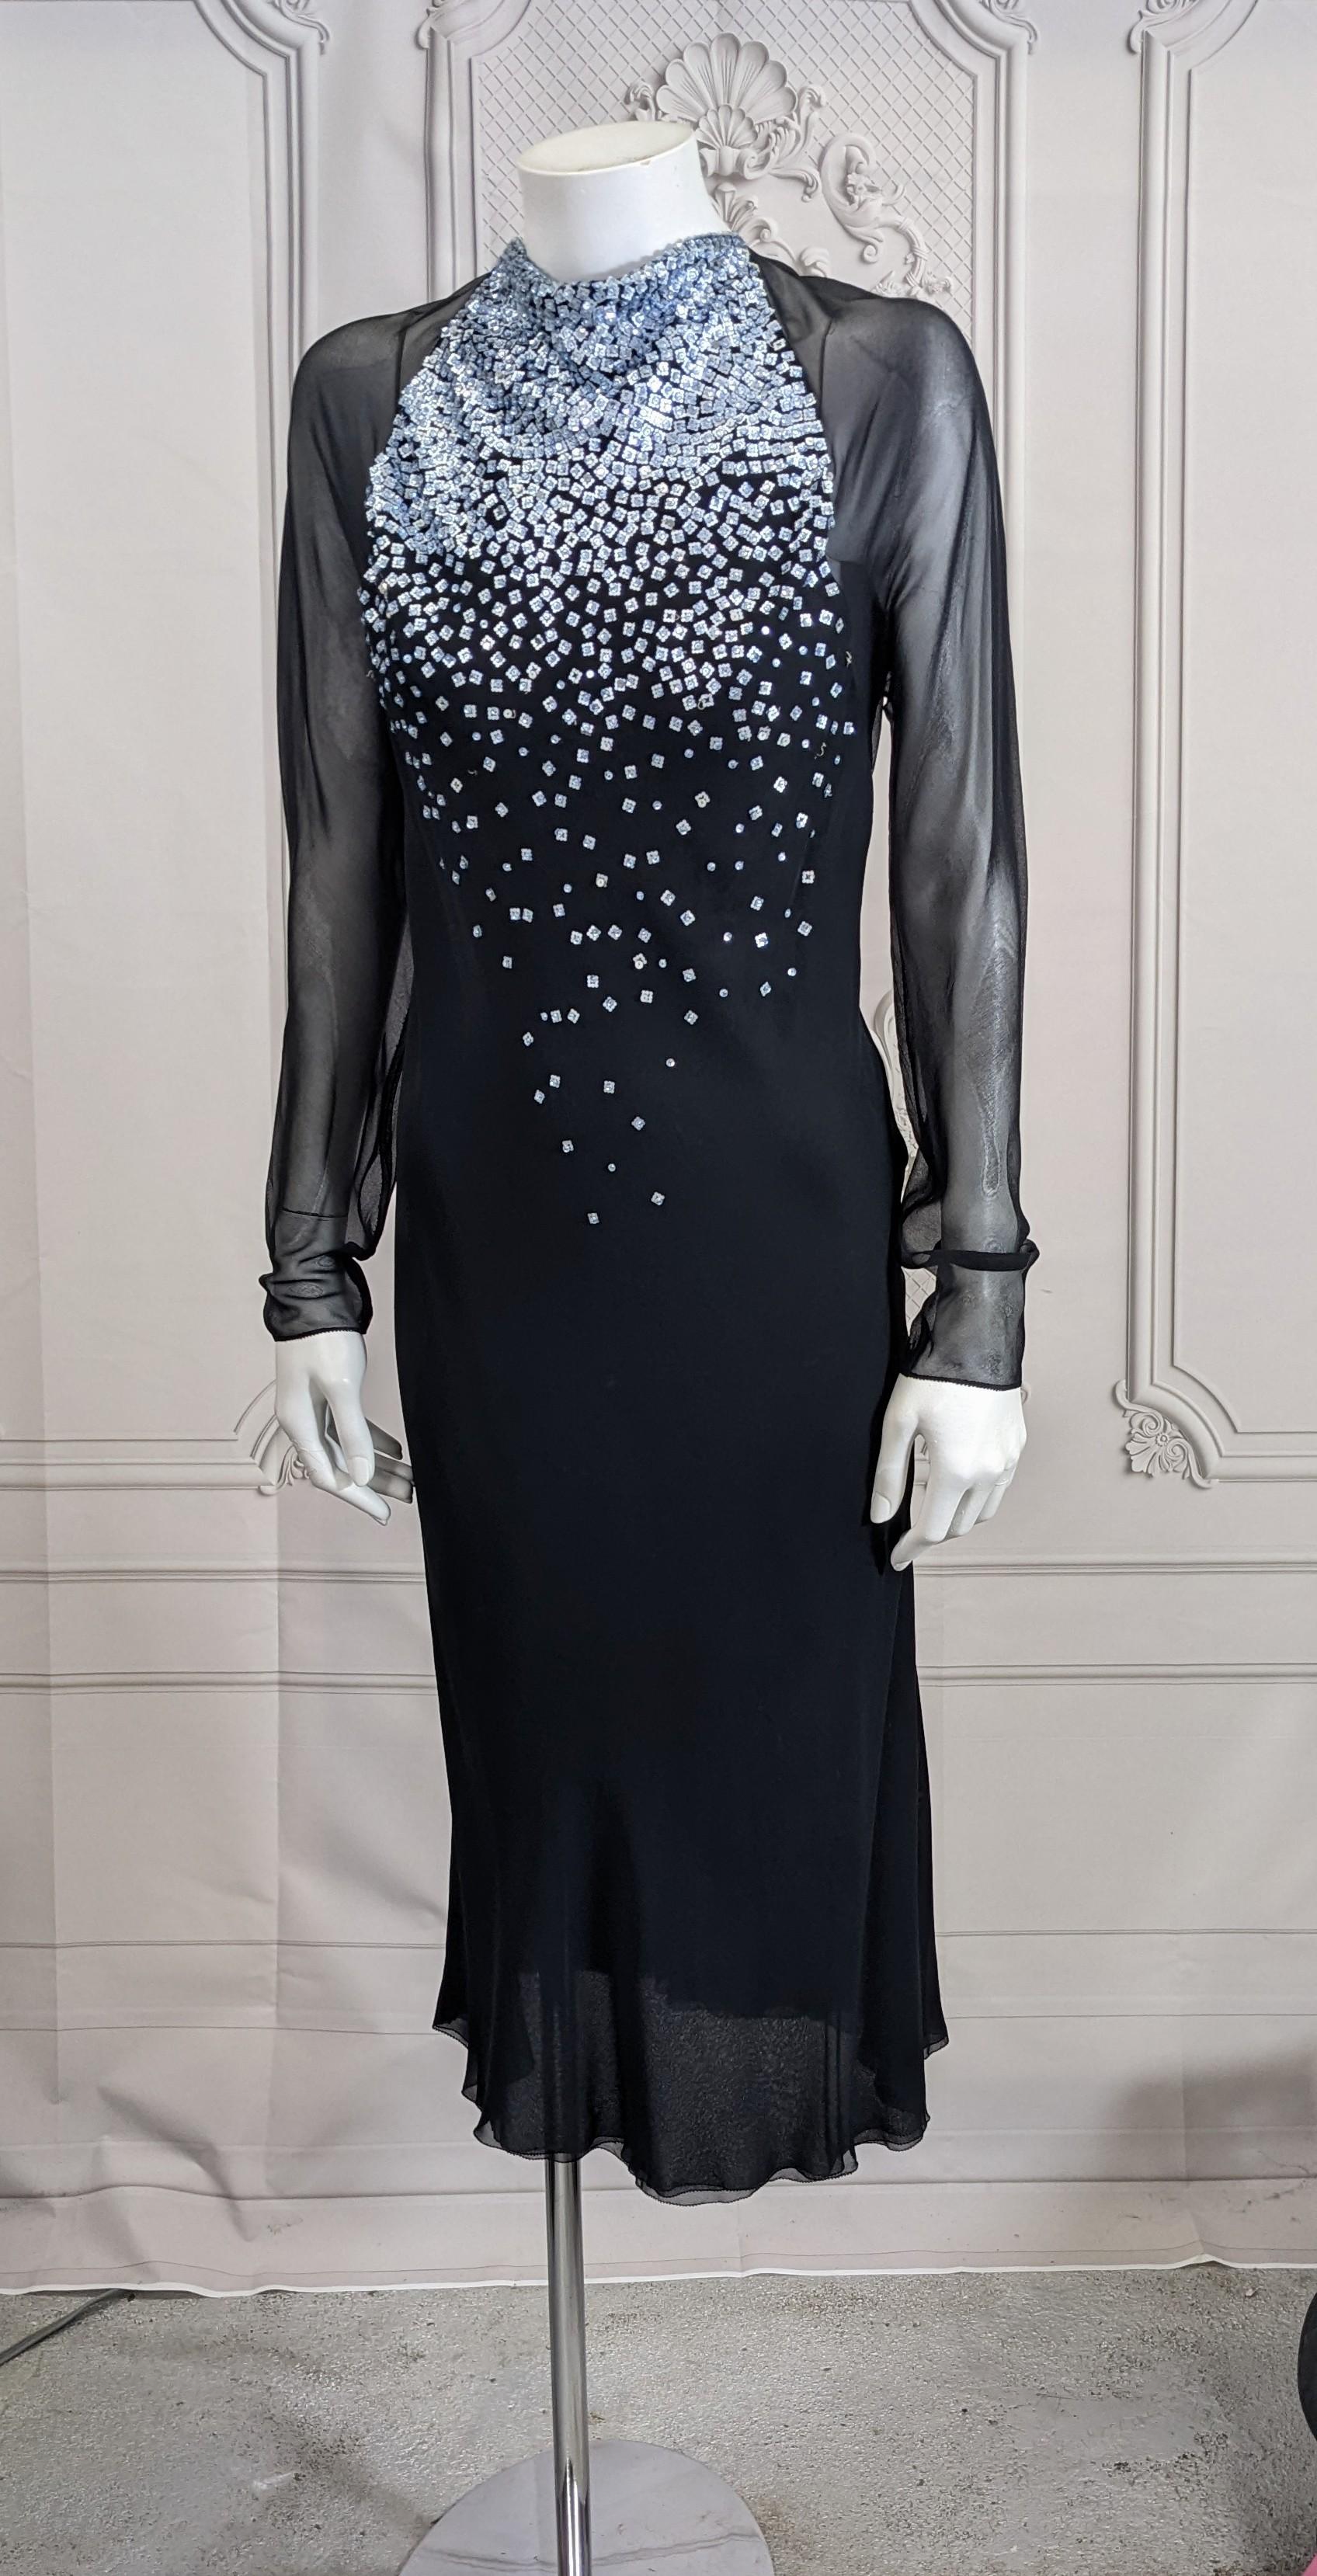 Jackie Rogers Elegant Bias Chiffon Beaded Evening Dress. 2 layers of bias black silk chiffon are used for the body of the dress with long sheer sleeves. The cowl neckline is beaded with sequins overlaid with crystals in pale blue degrading from neck